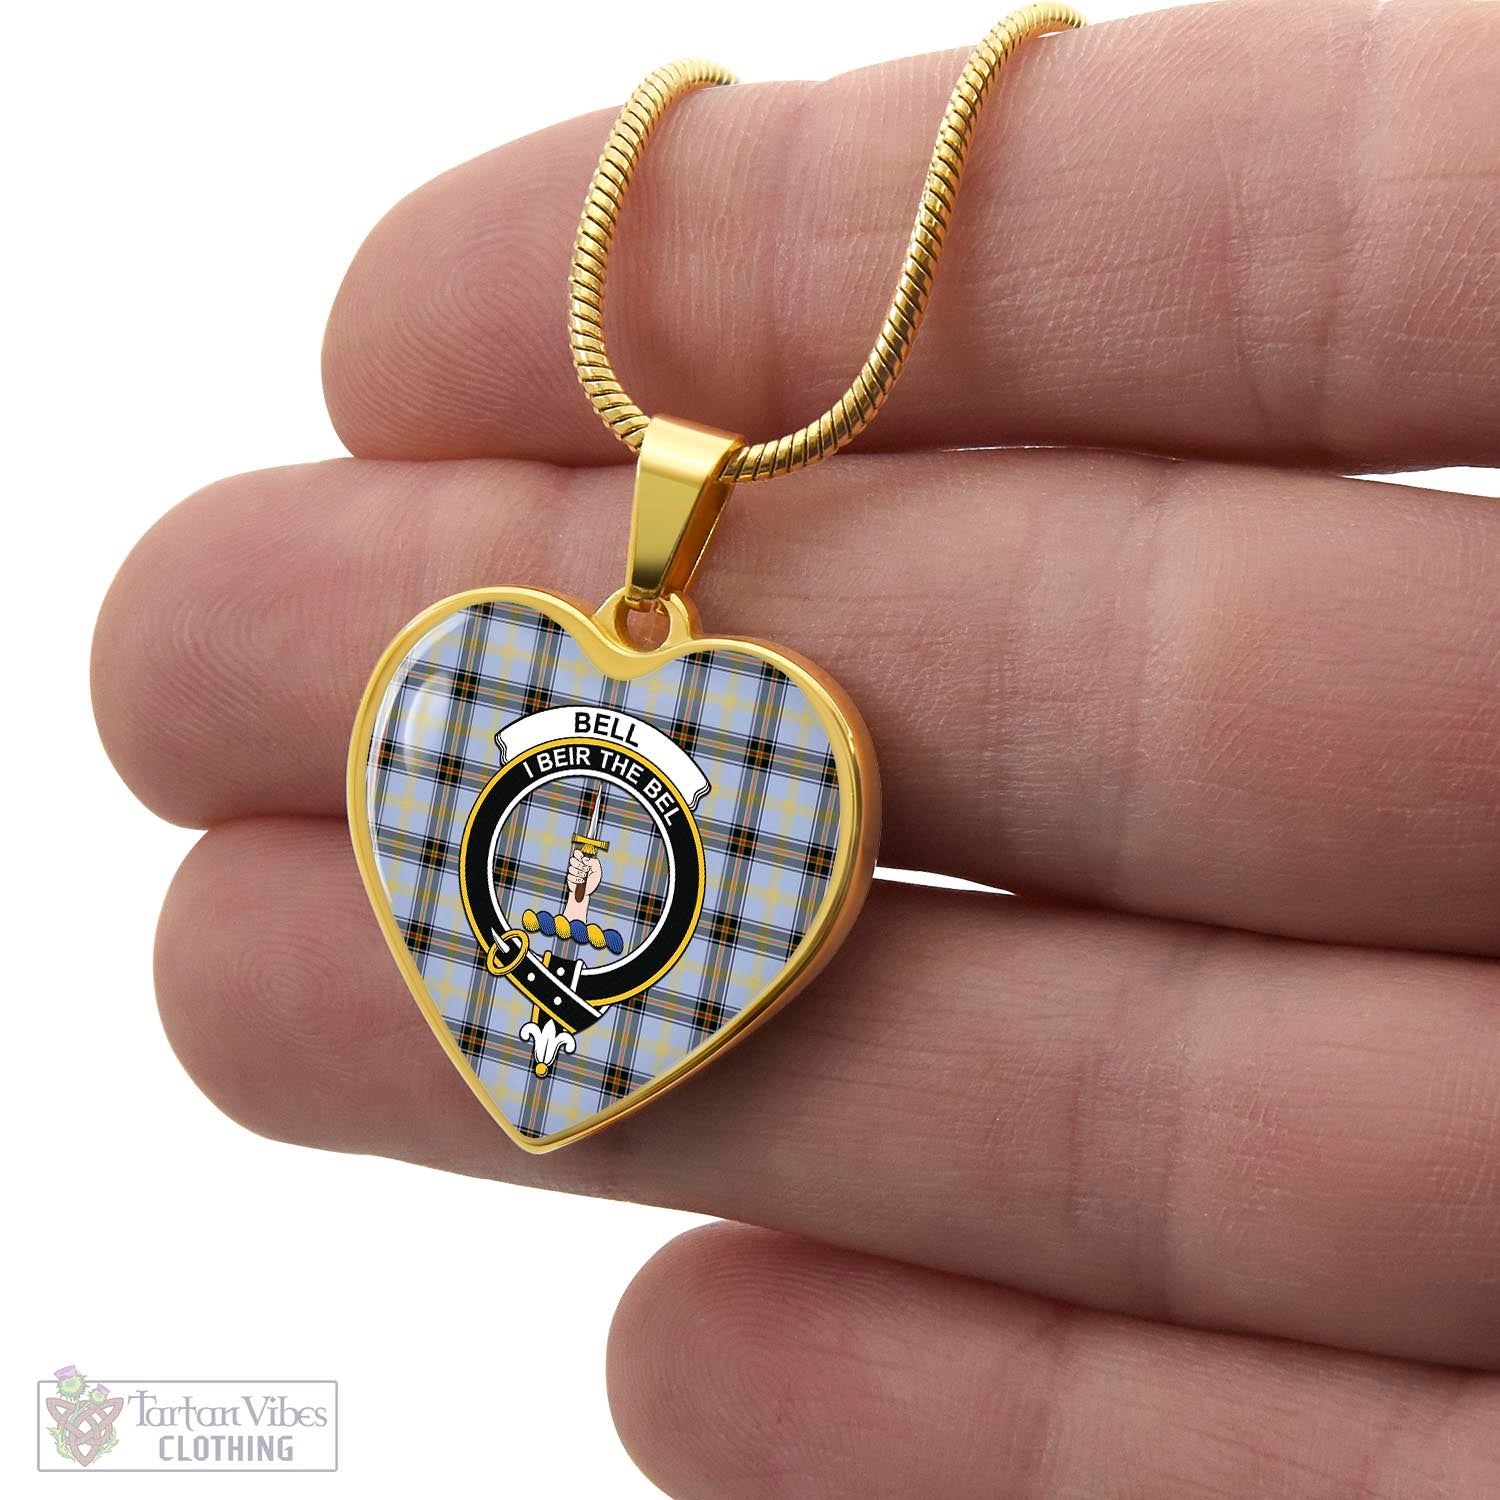 Tartan Vibes Clothing Bell Tartan Heart Necklace with Family Crest